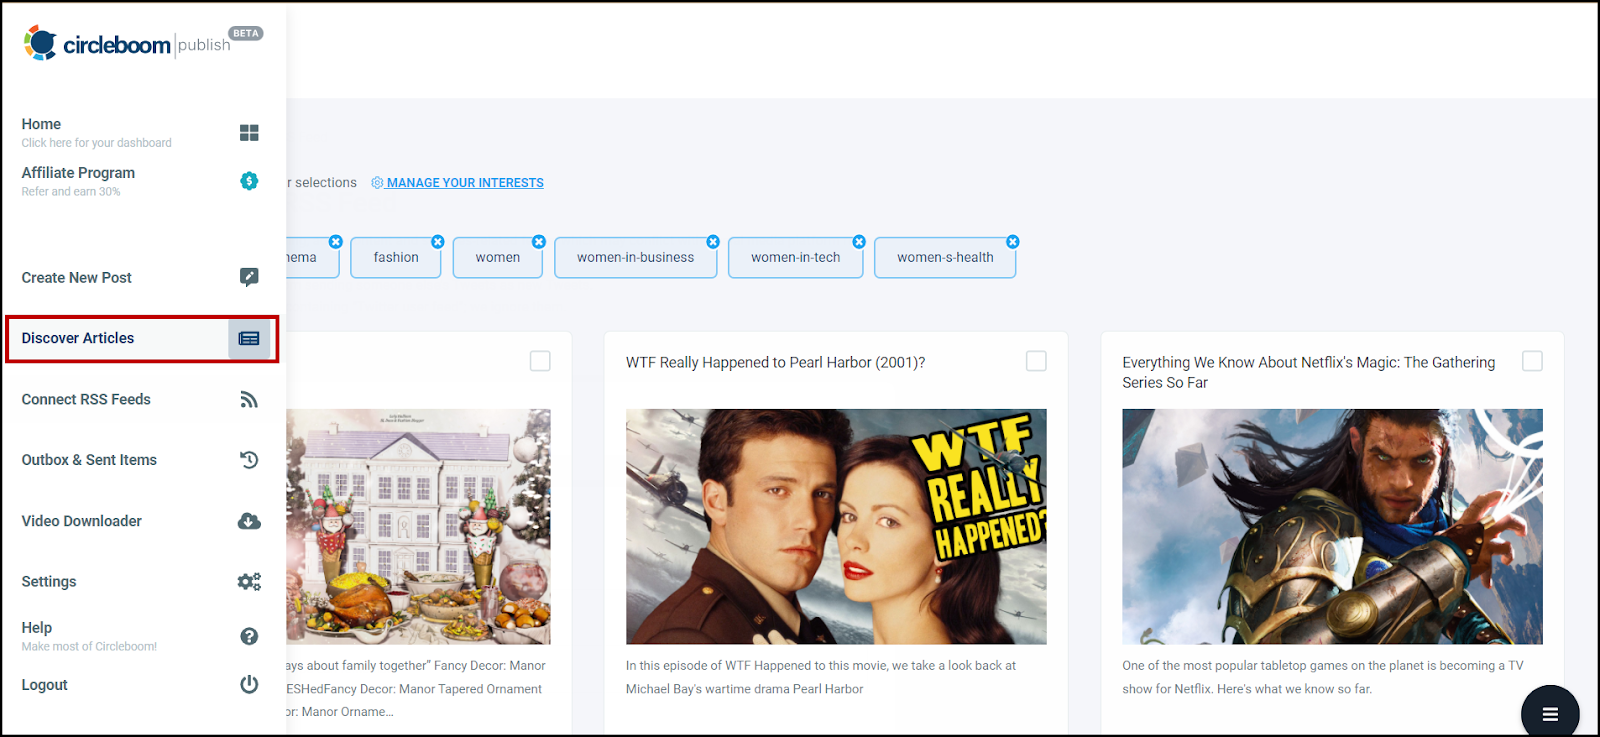 You can discover amazing articles by using 'Discover Articles' feature on Circleboom.